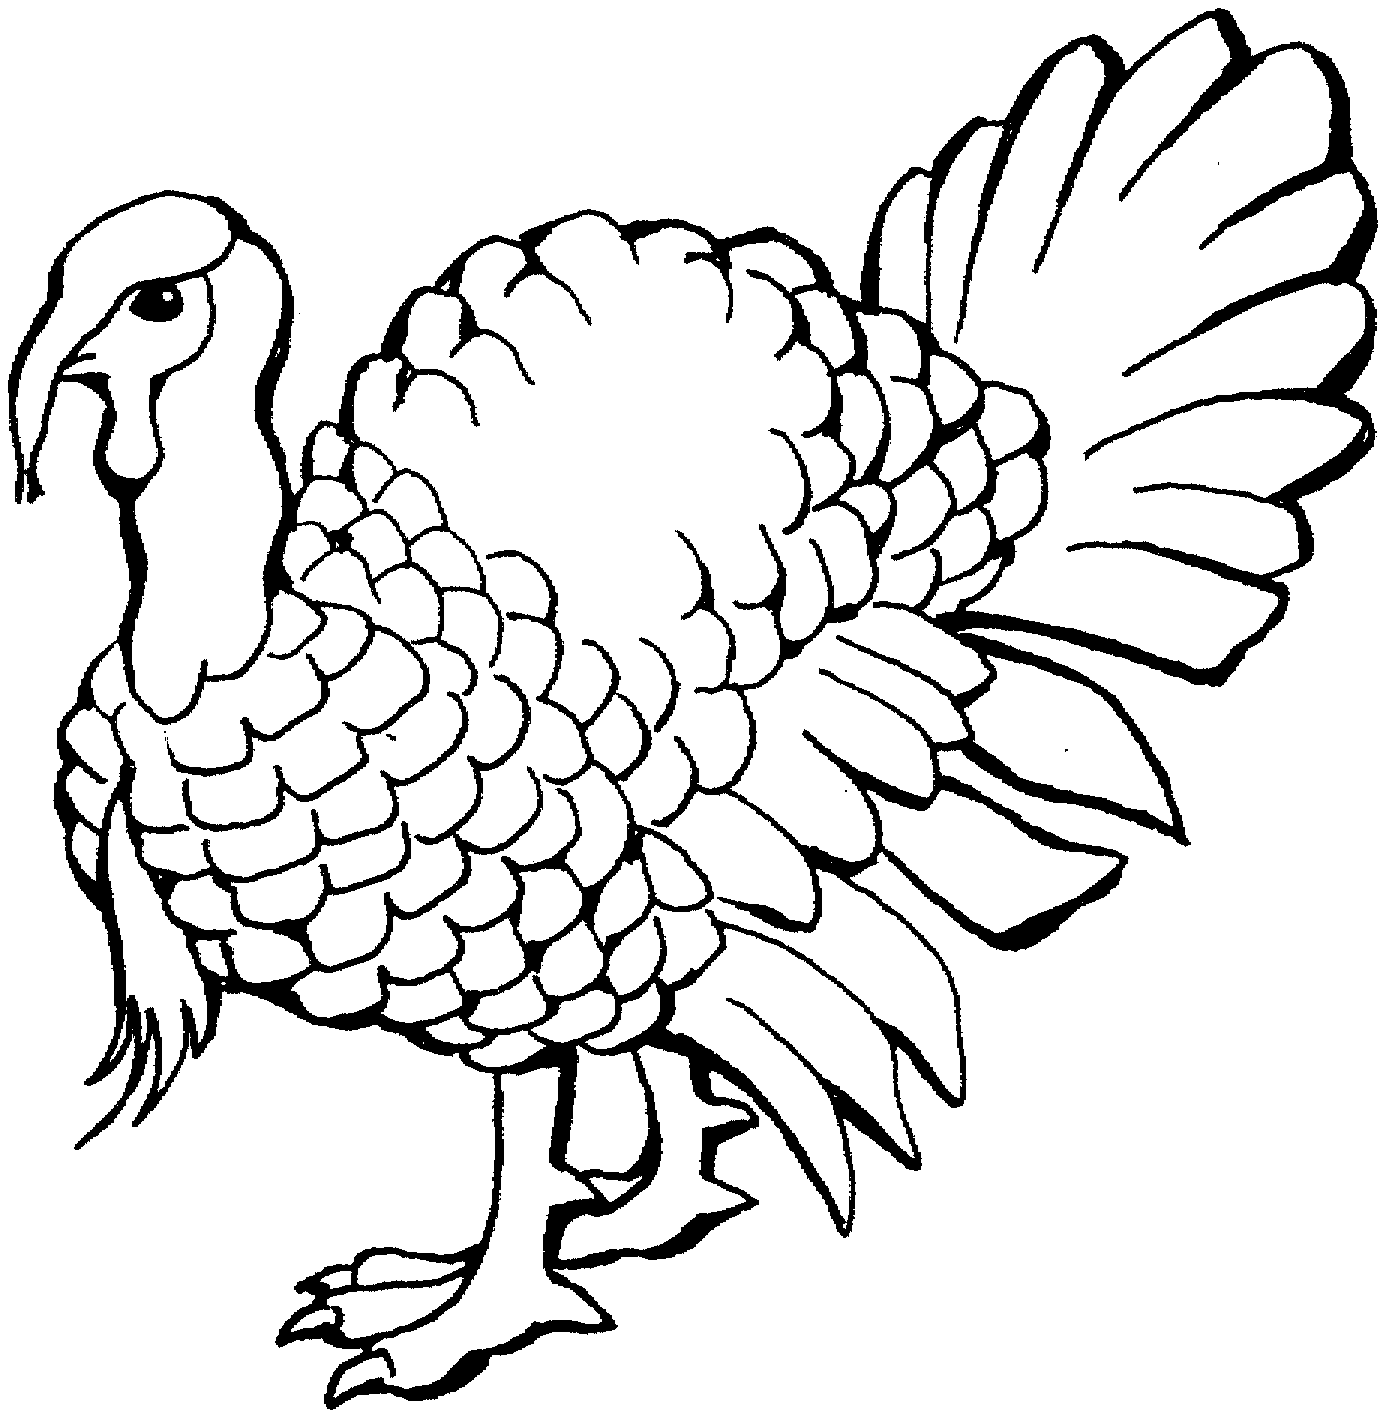 turkeys to color free printable turkey coloring pages for kids turkeys to color 